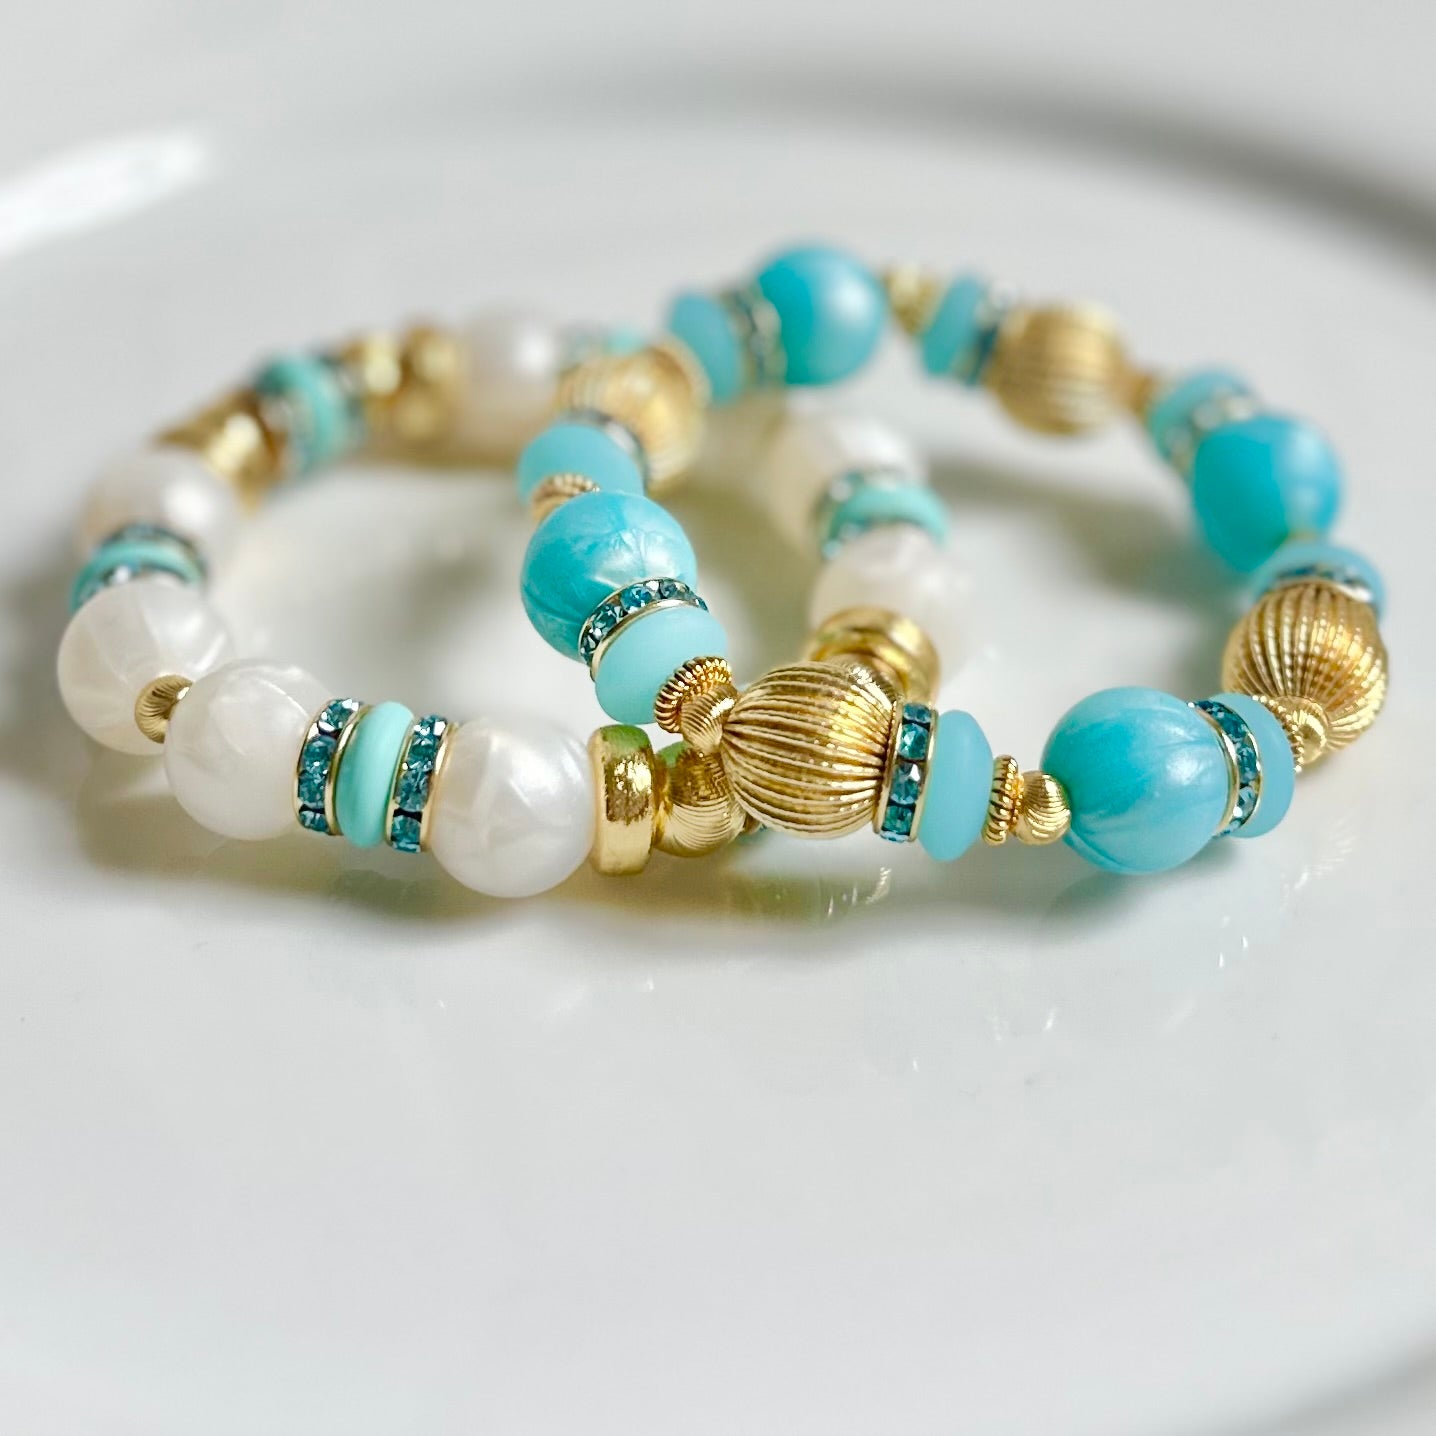 PEARLIZED IVORY BANGLE WITH TURQUOISE AND CZ ACCENTS